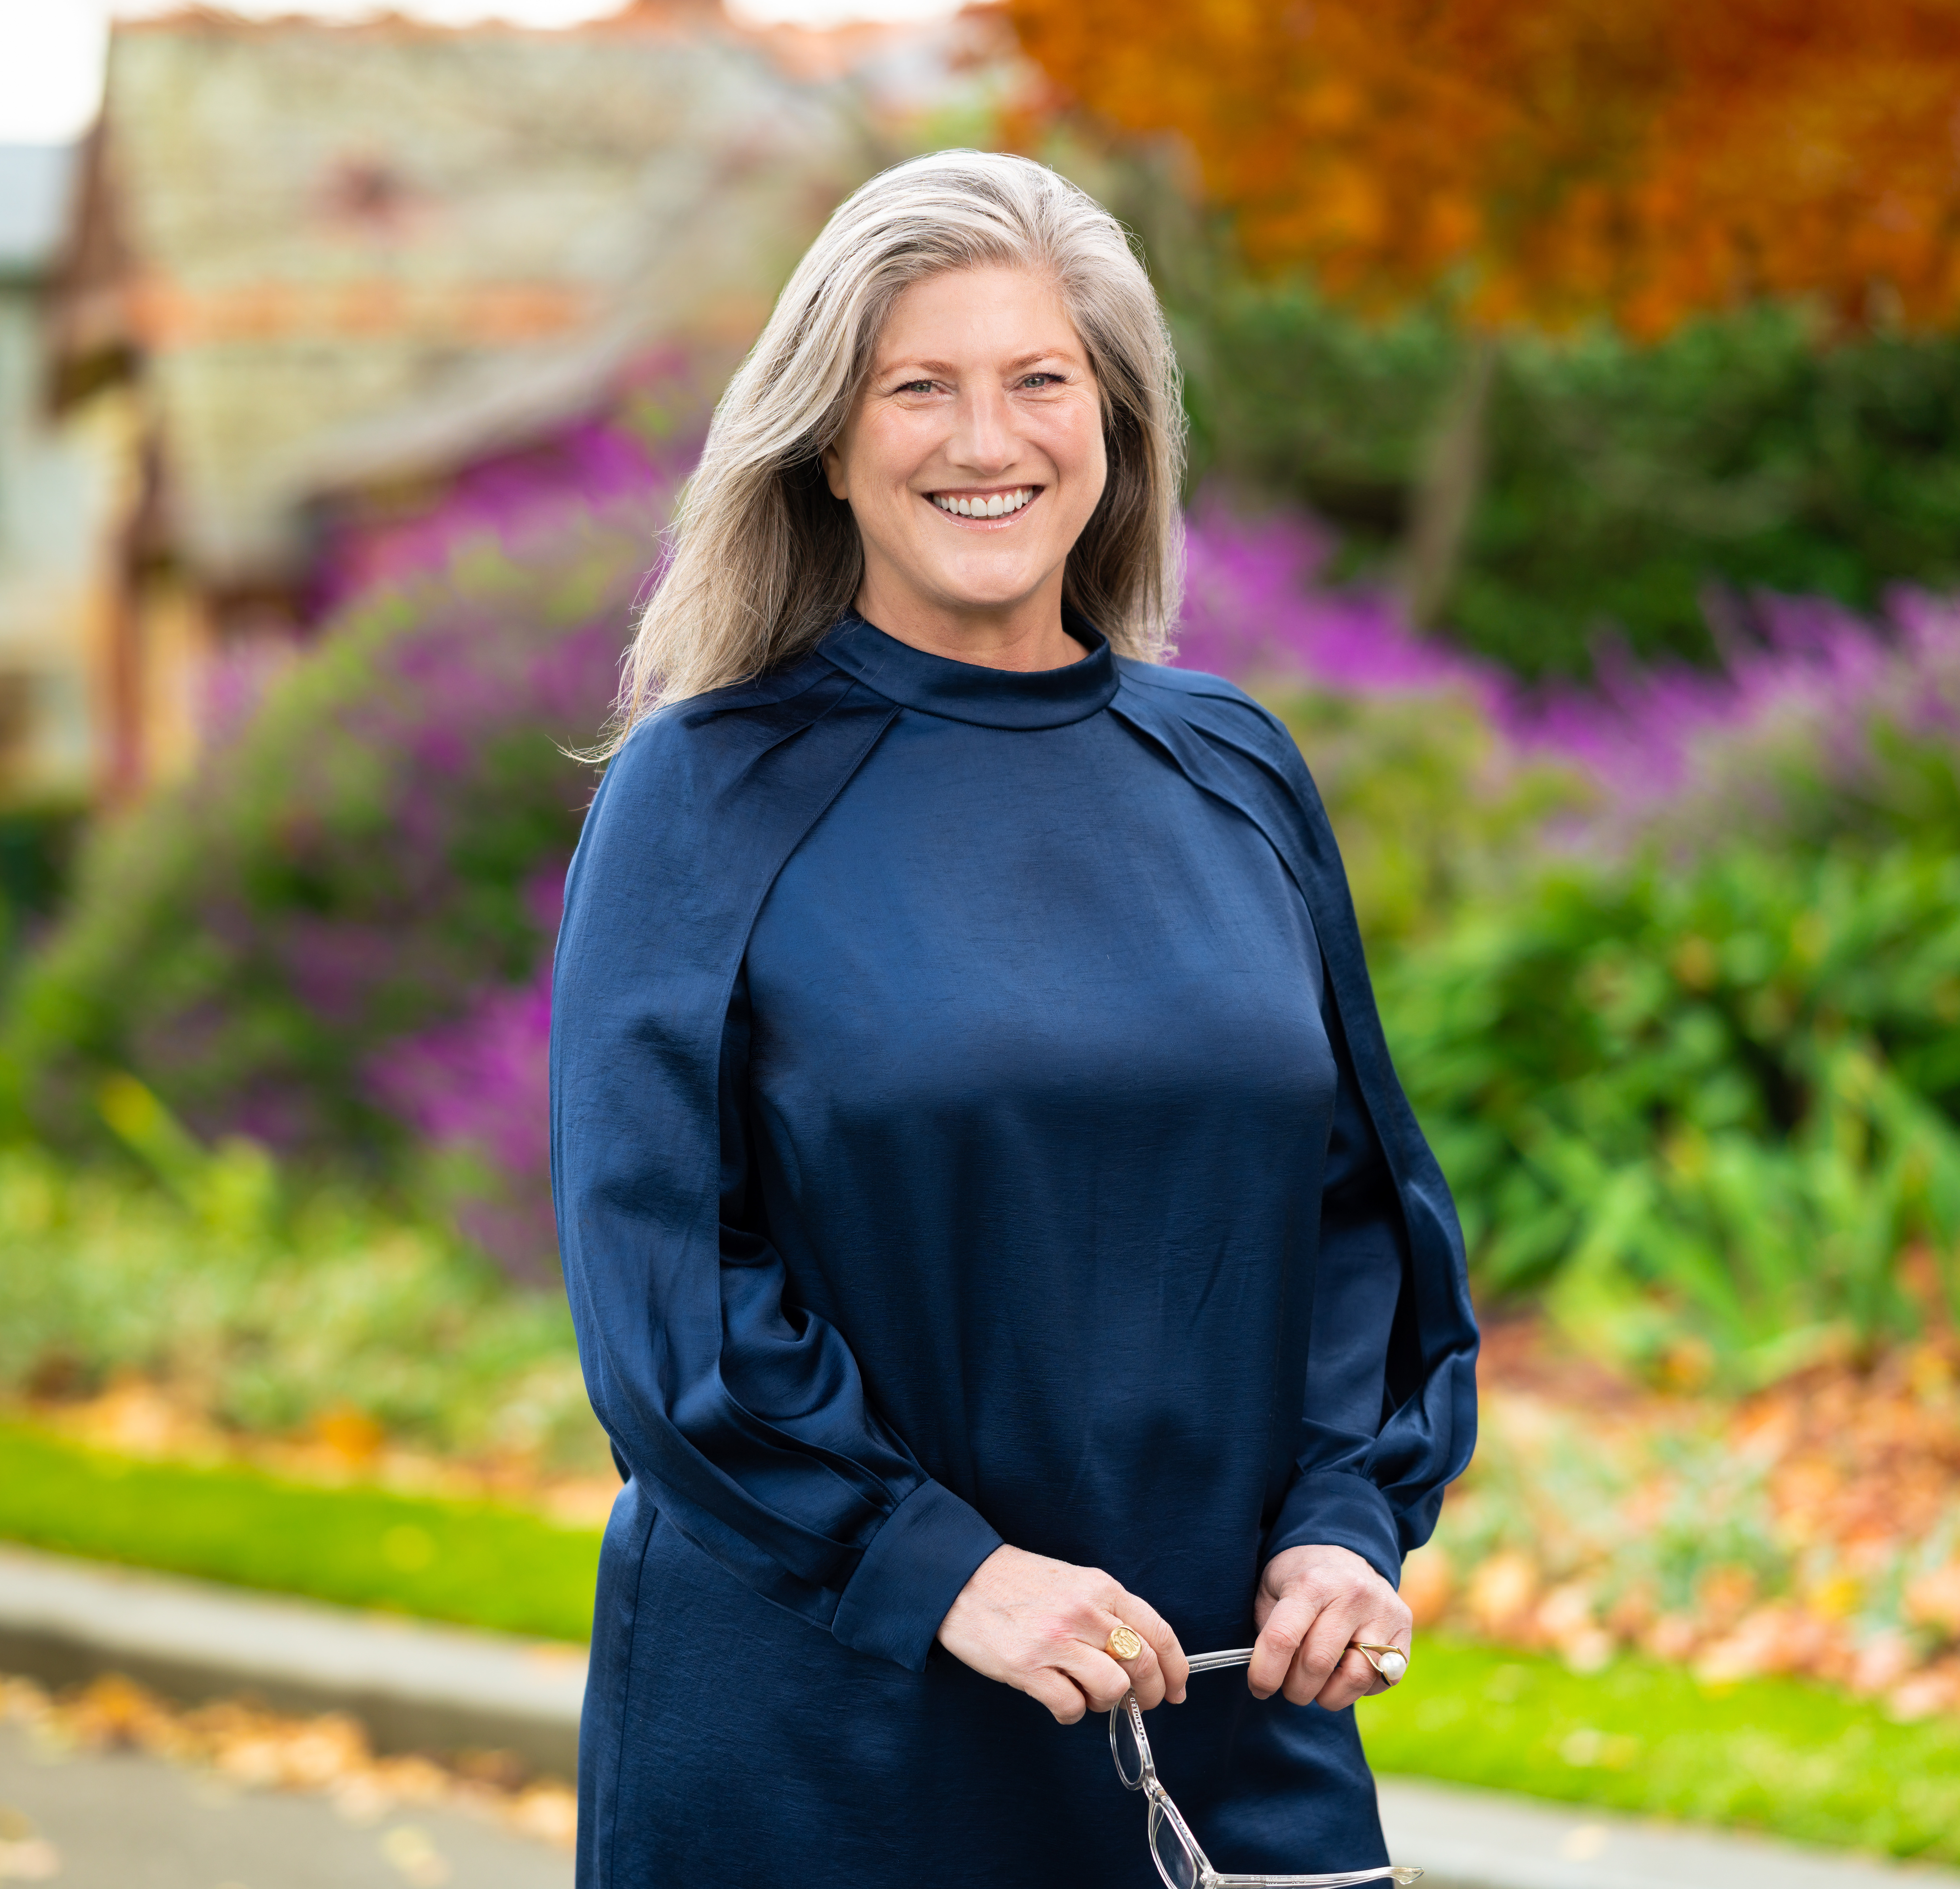 A woman with long grey hair, wearing a dark blue dress standing in a leafy park smiling.